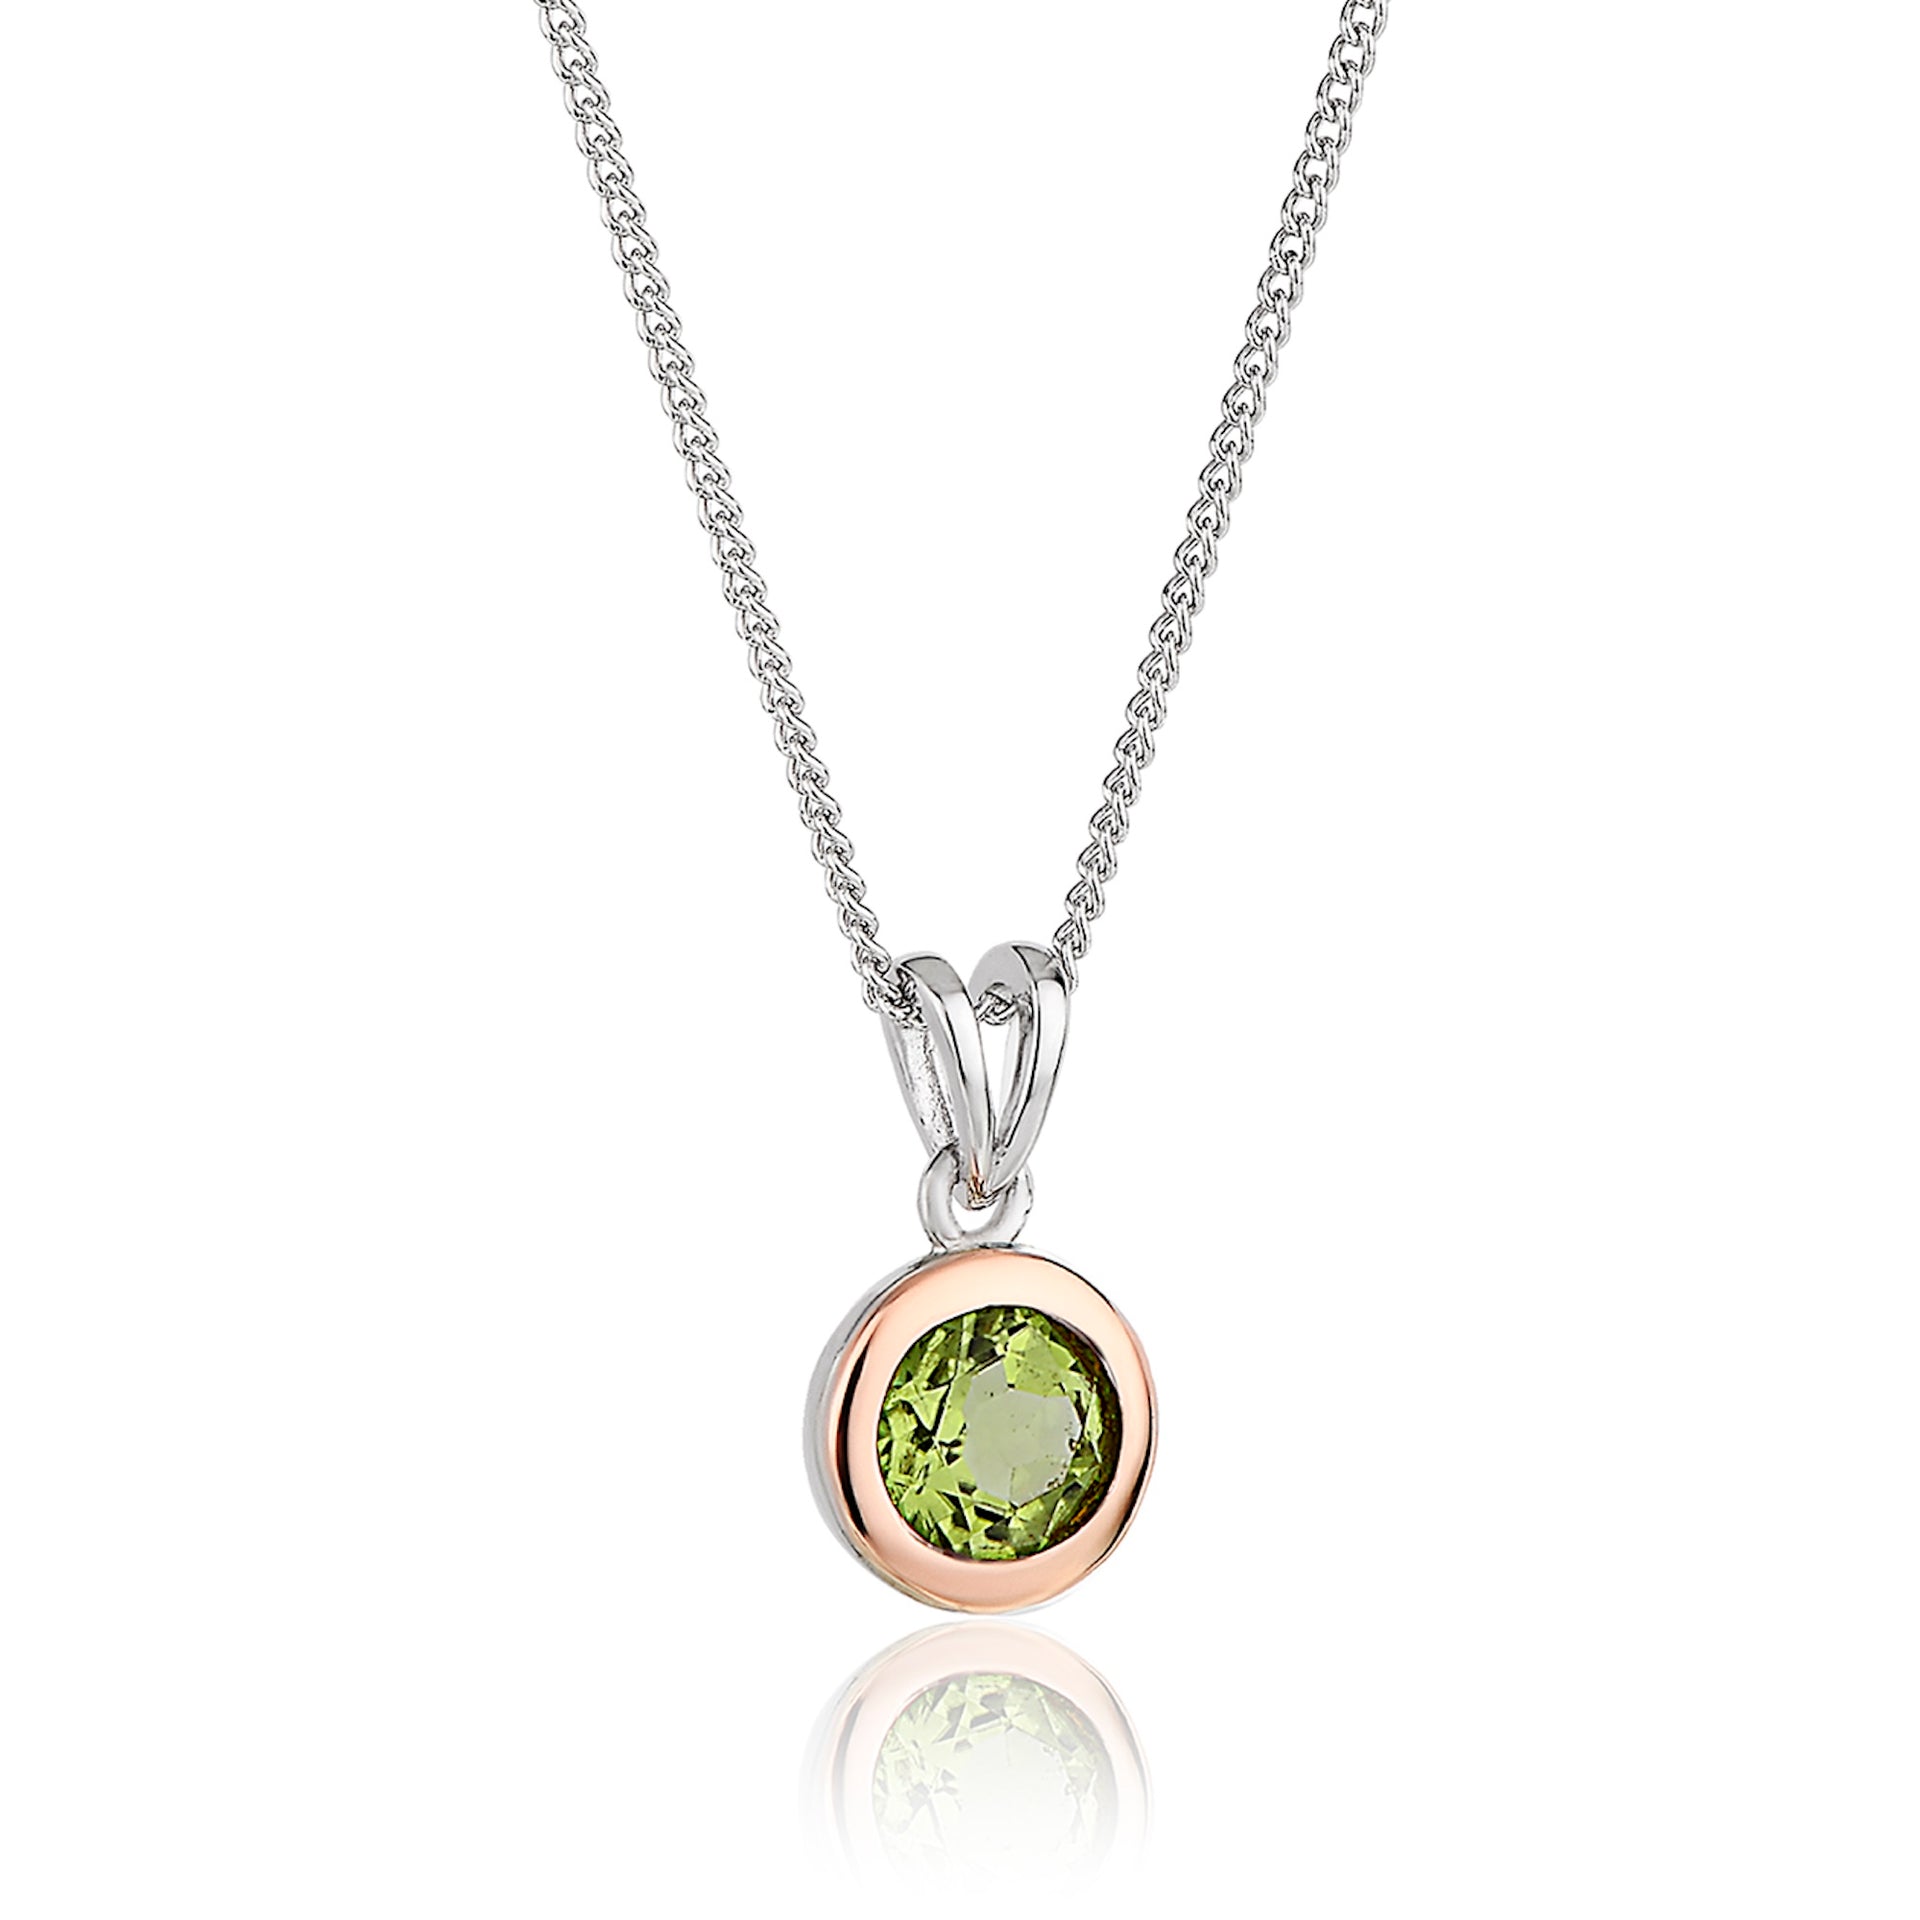 Birthstone Silver and Peridot Pendant – August